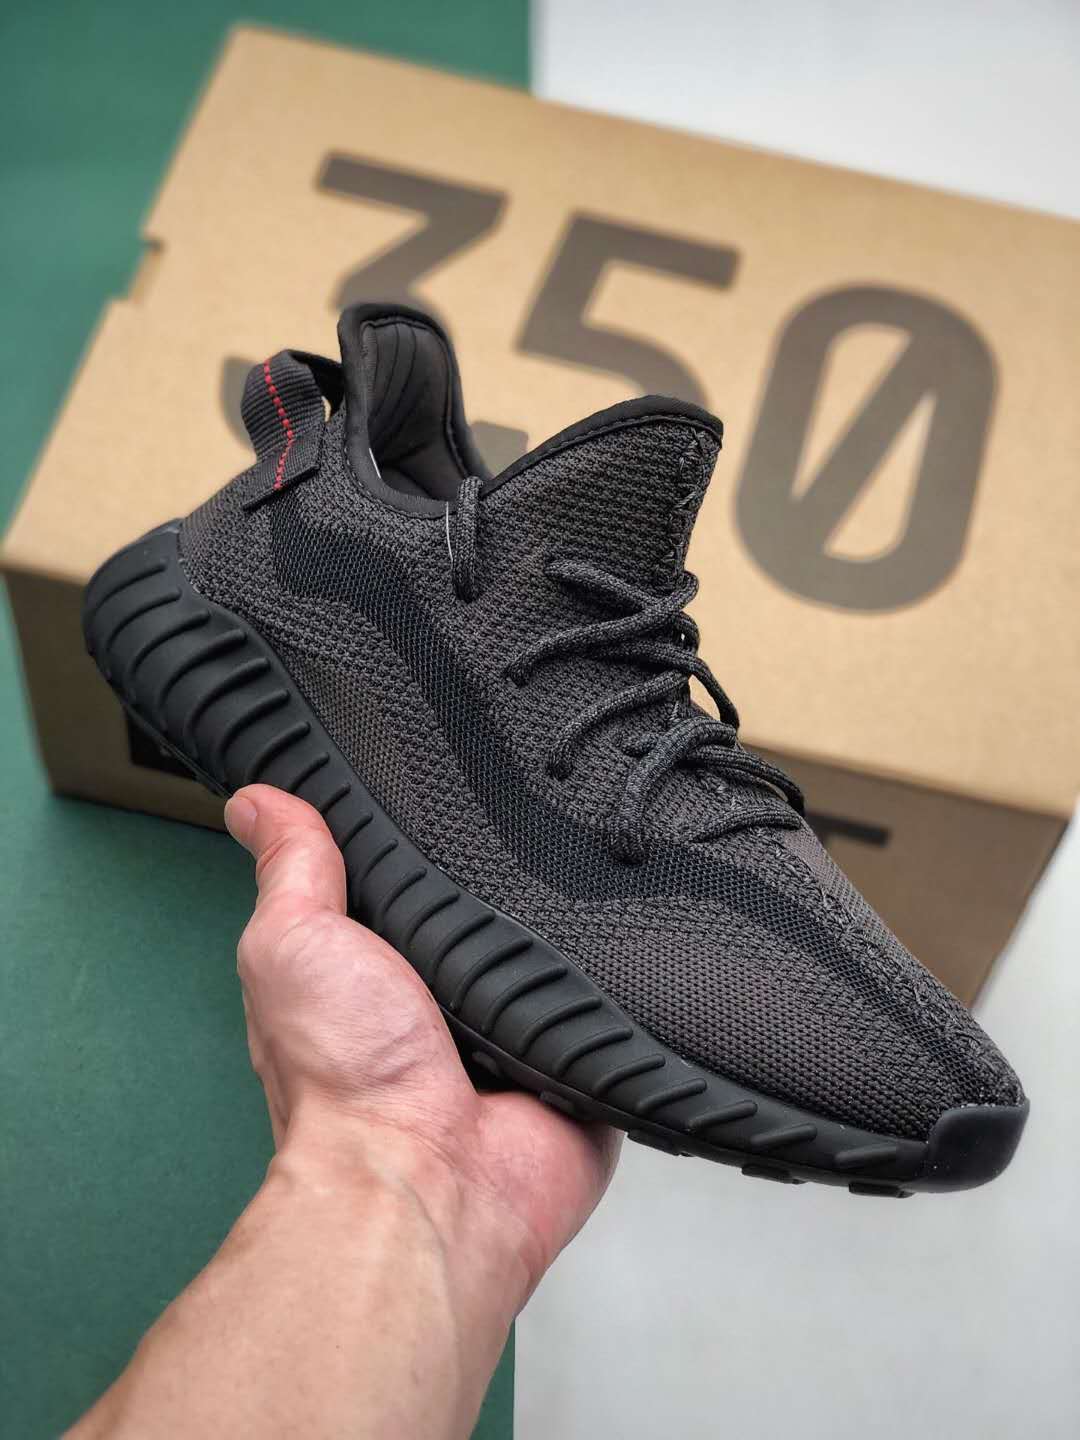 Adidas Yeezy Boost 350 V3 FU9015 - Latest Release from Adidas